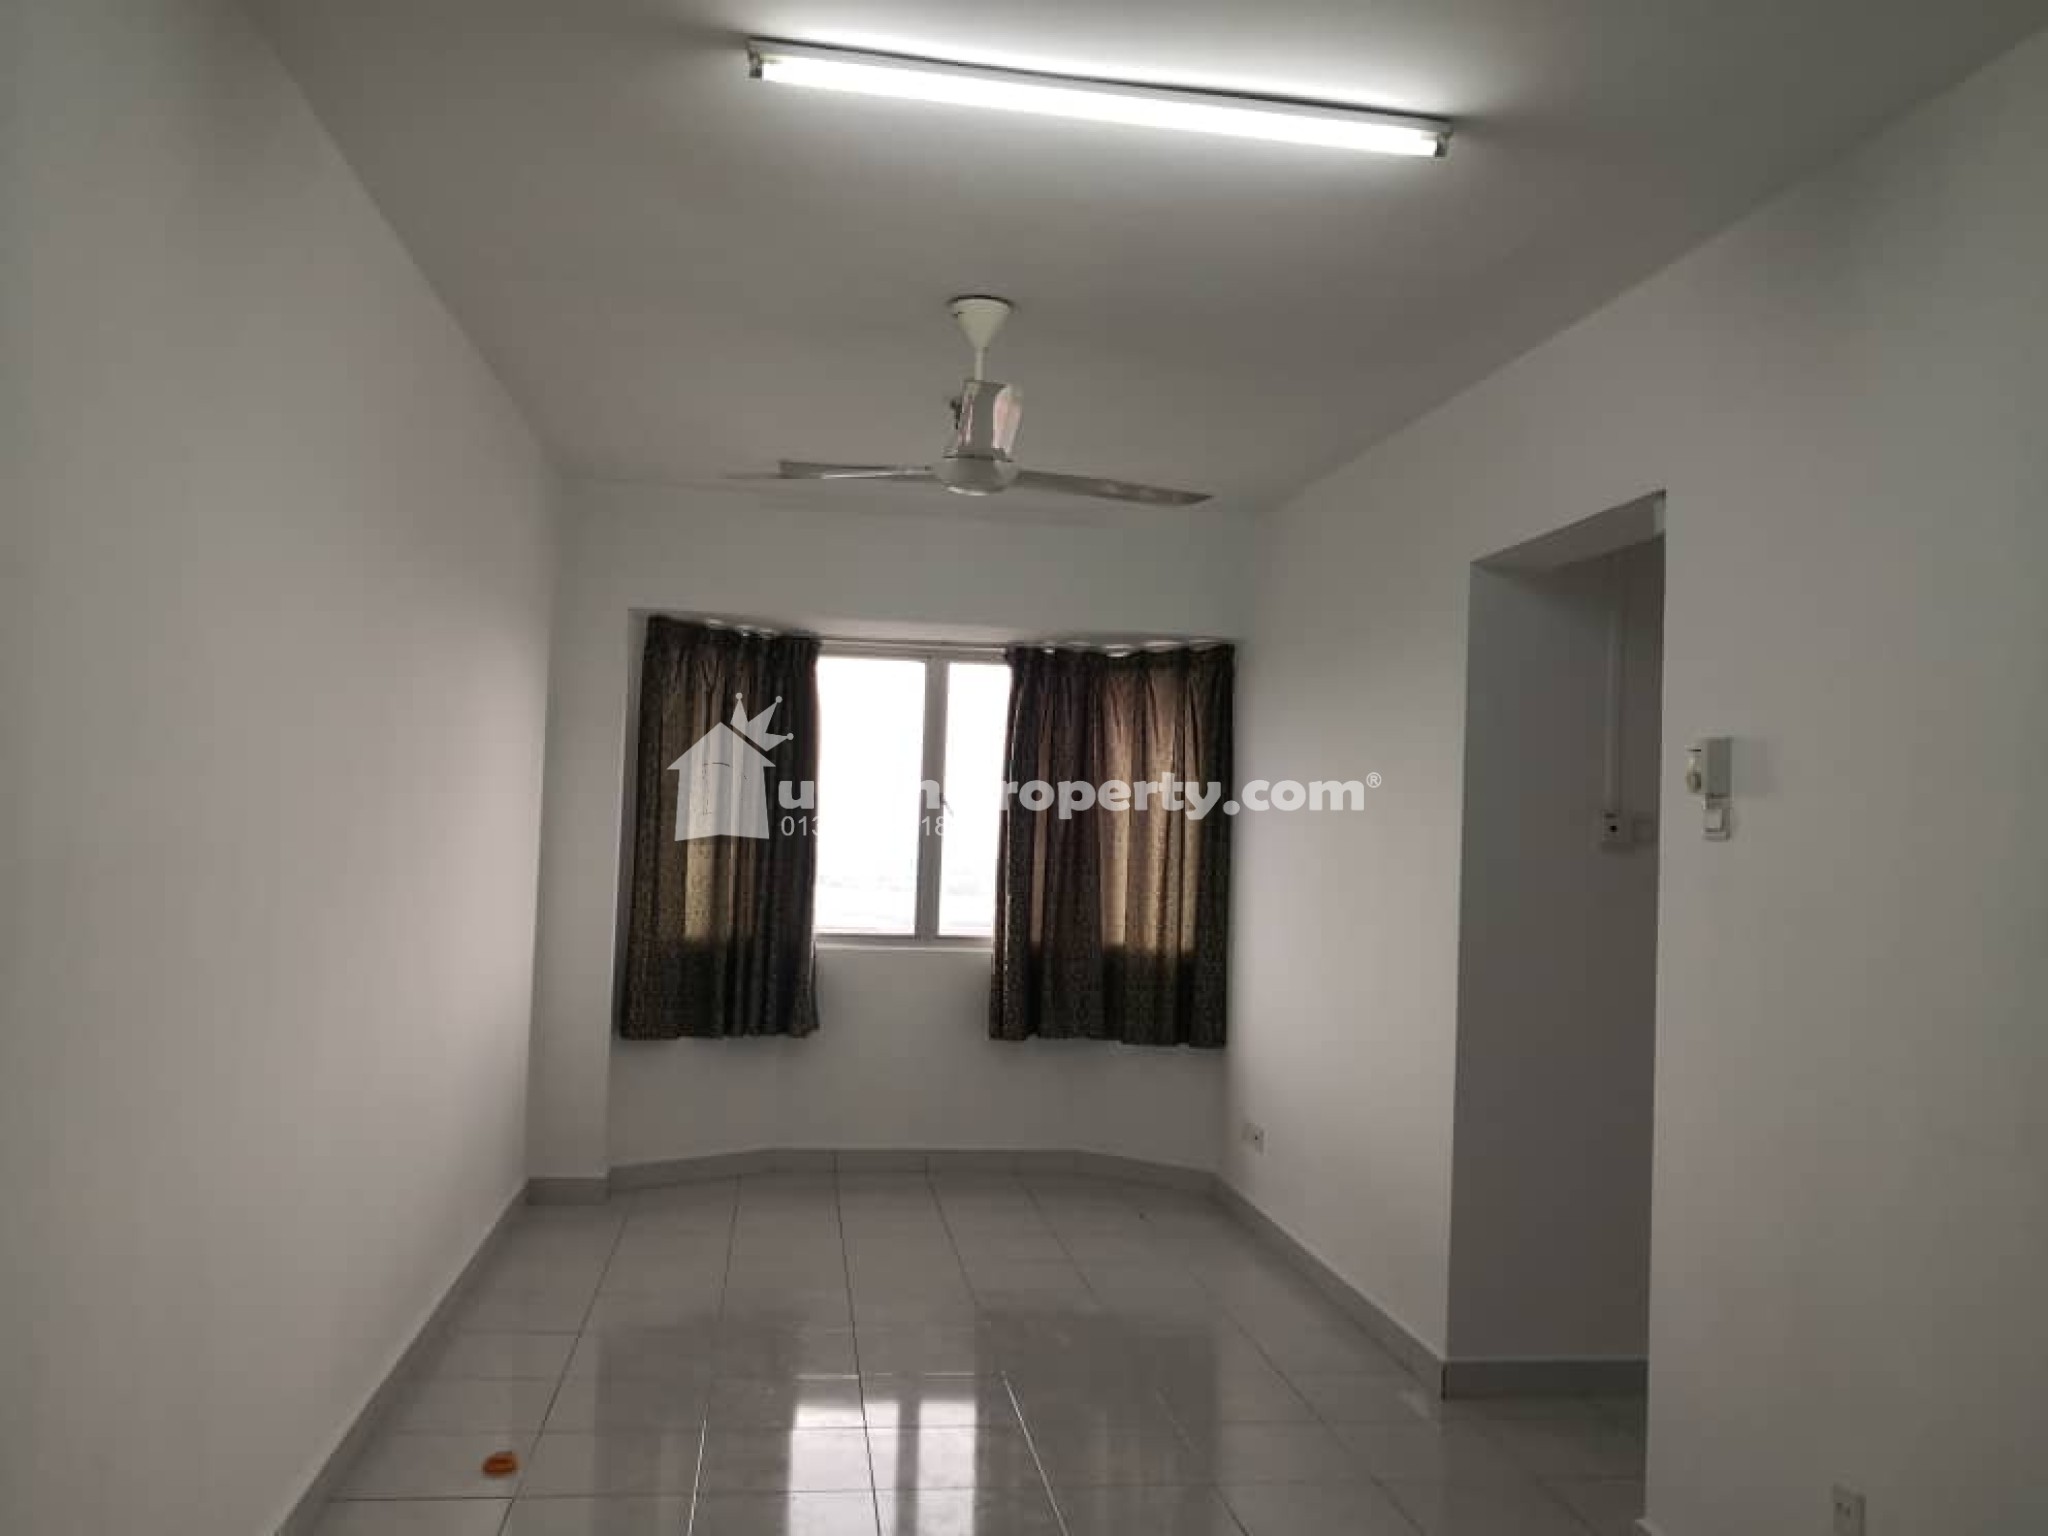 Condo For Sale at Main Place Residence